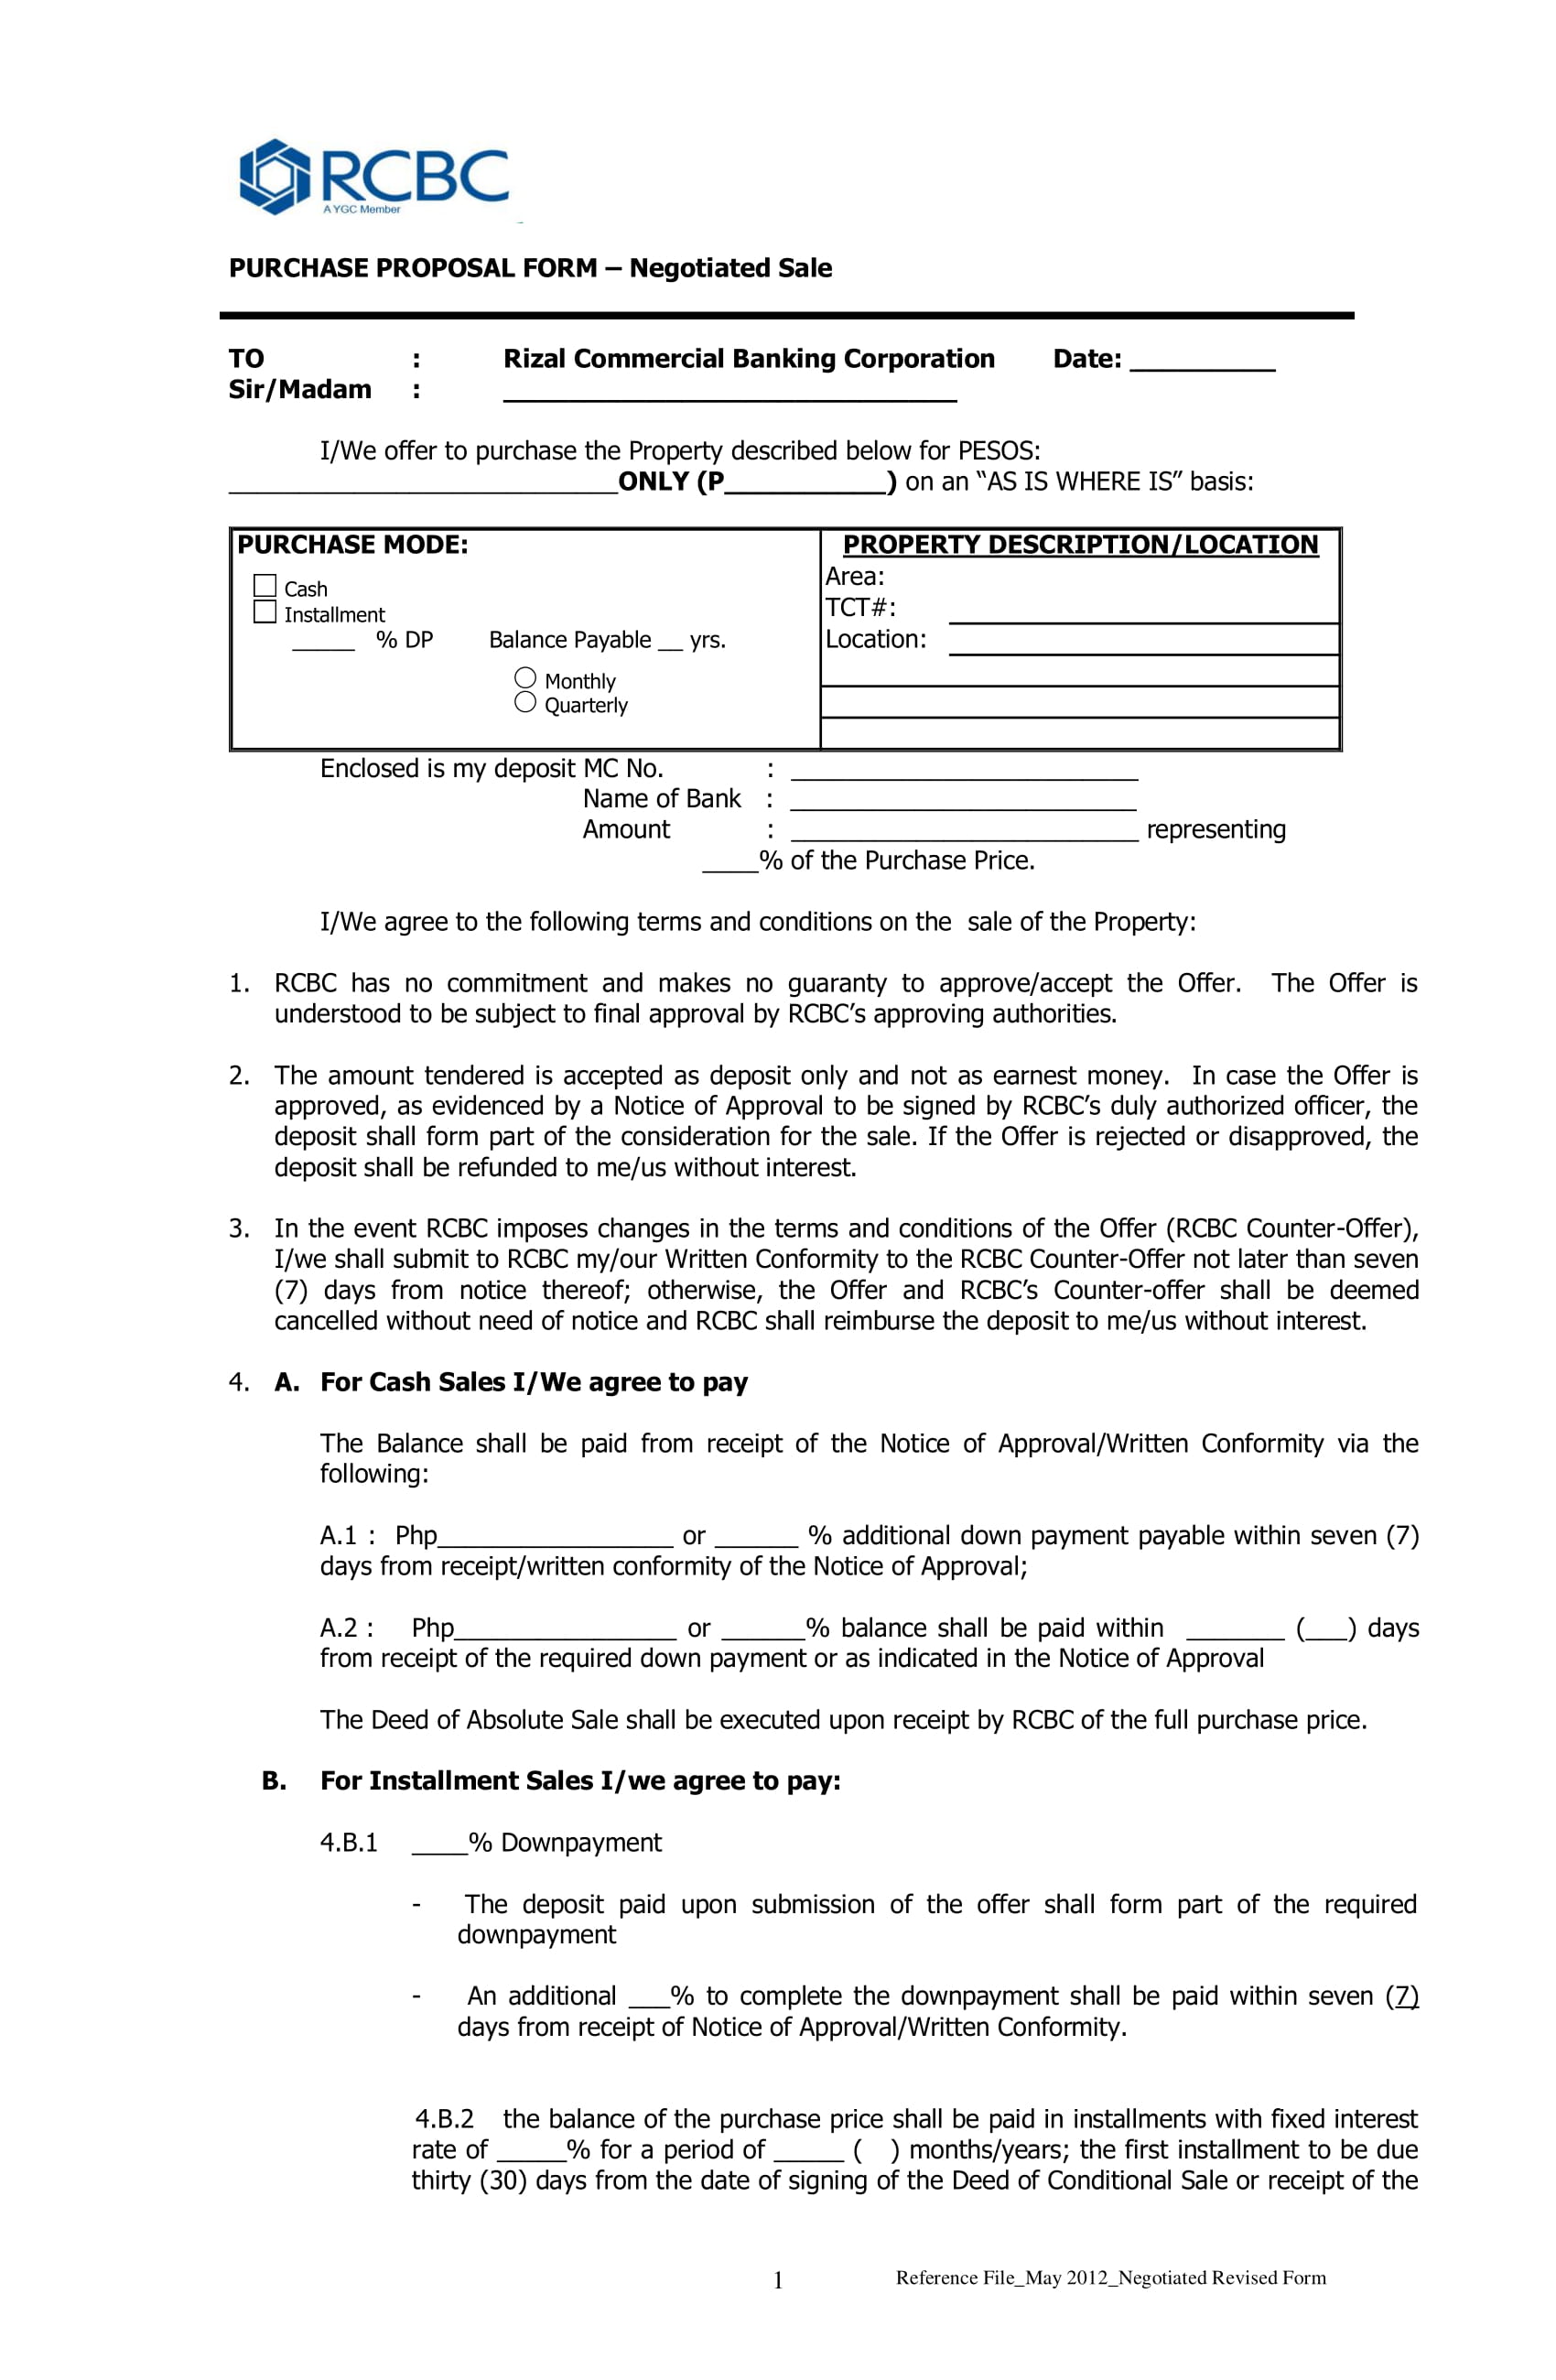 purchase proposal form example